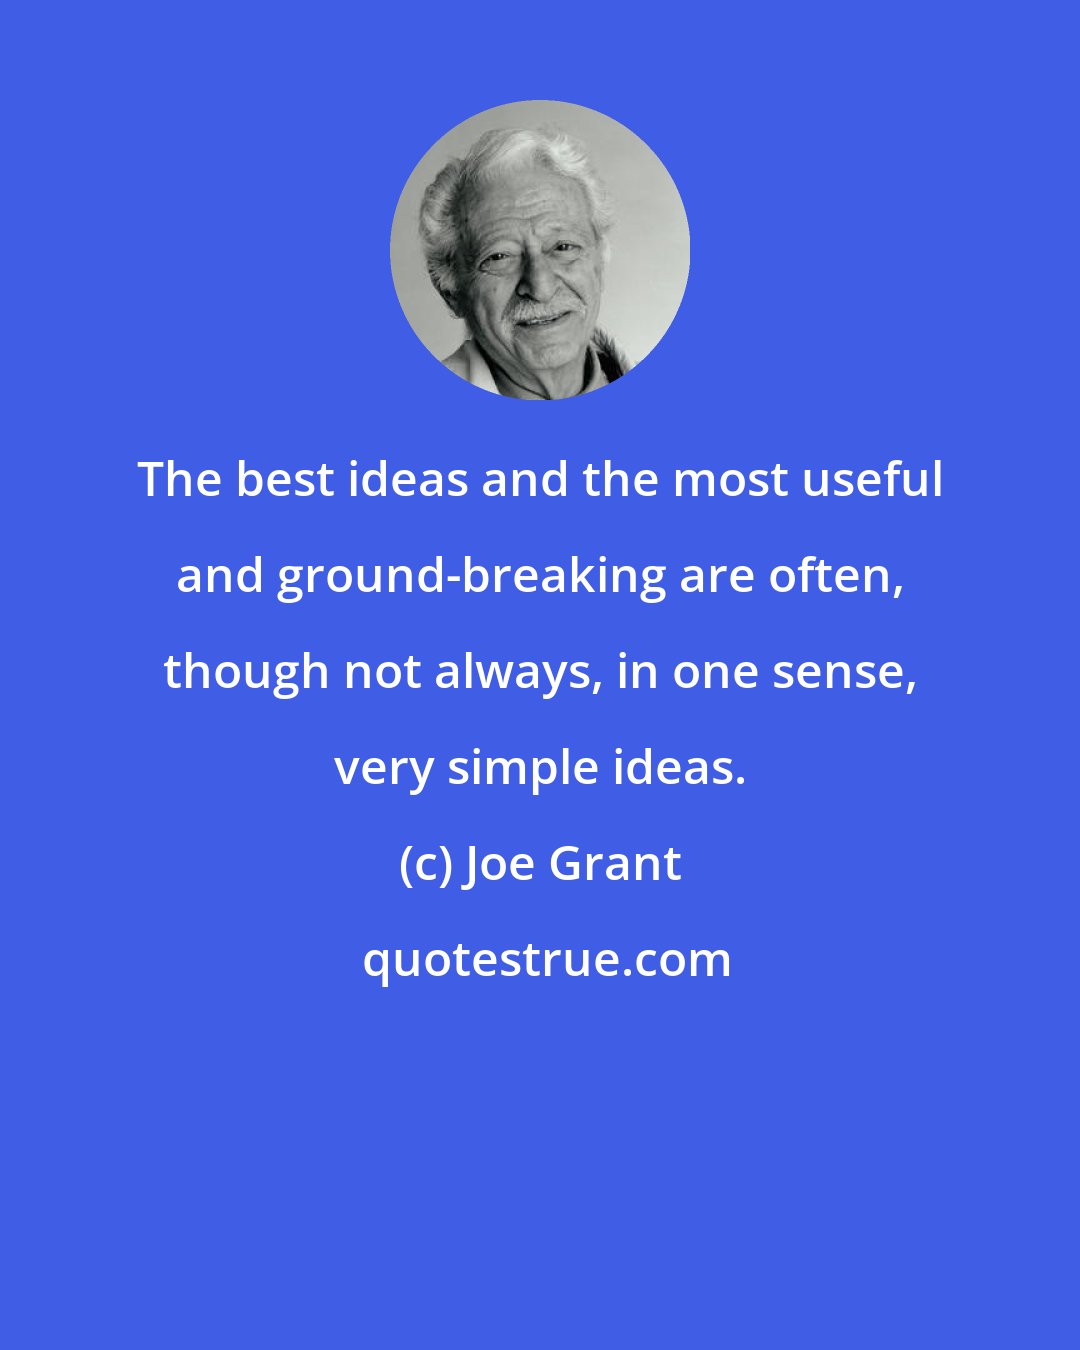 Joe Grant: The best ideas and the most useful and ground-breaking are often, though not always, in one sense, very simple ideas.